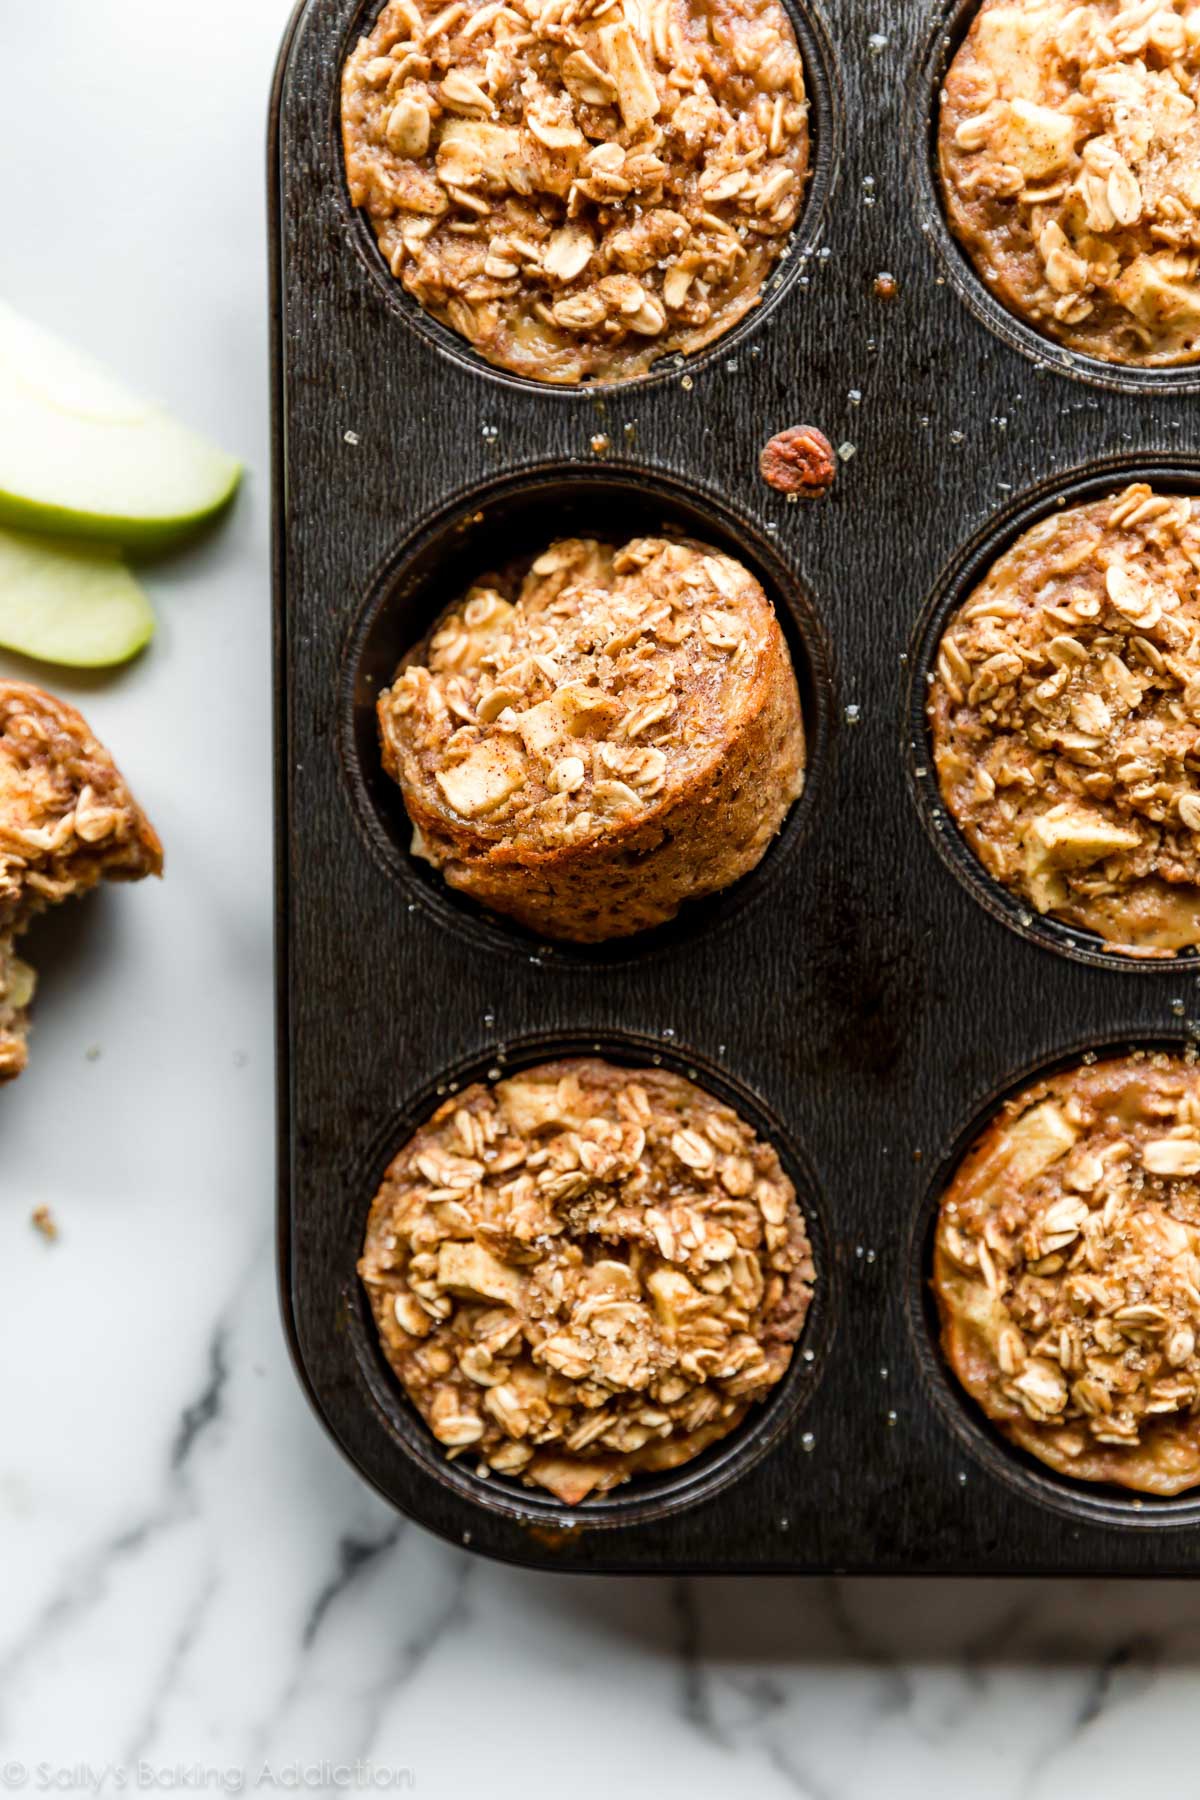 Cooked apple and cinnamon baked oatmeal cups in a muffin tin.